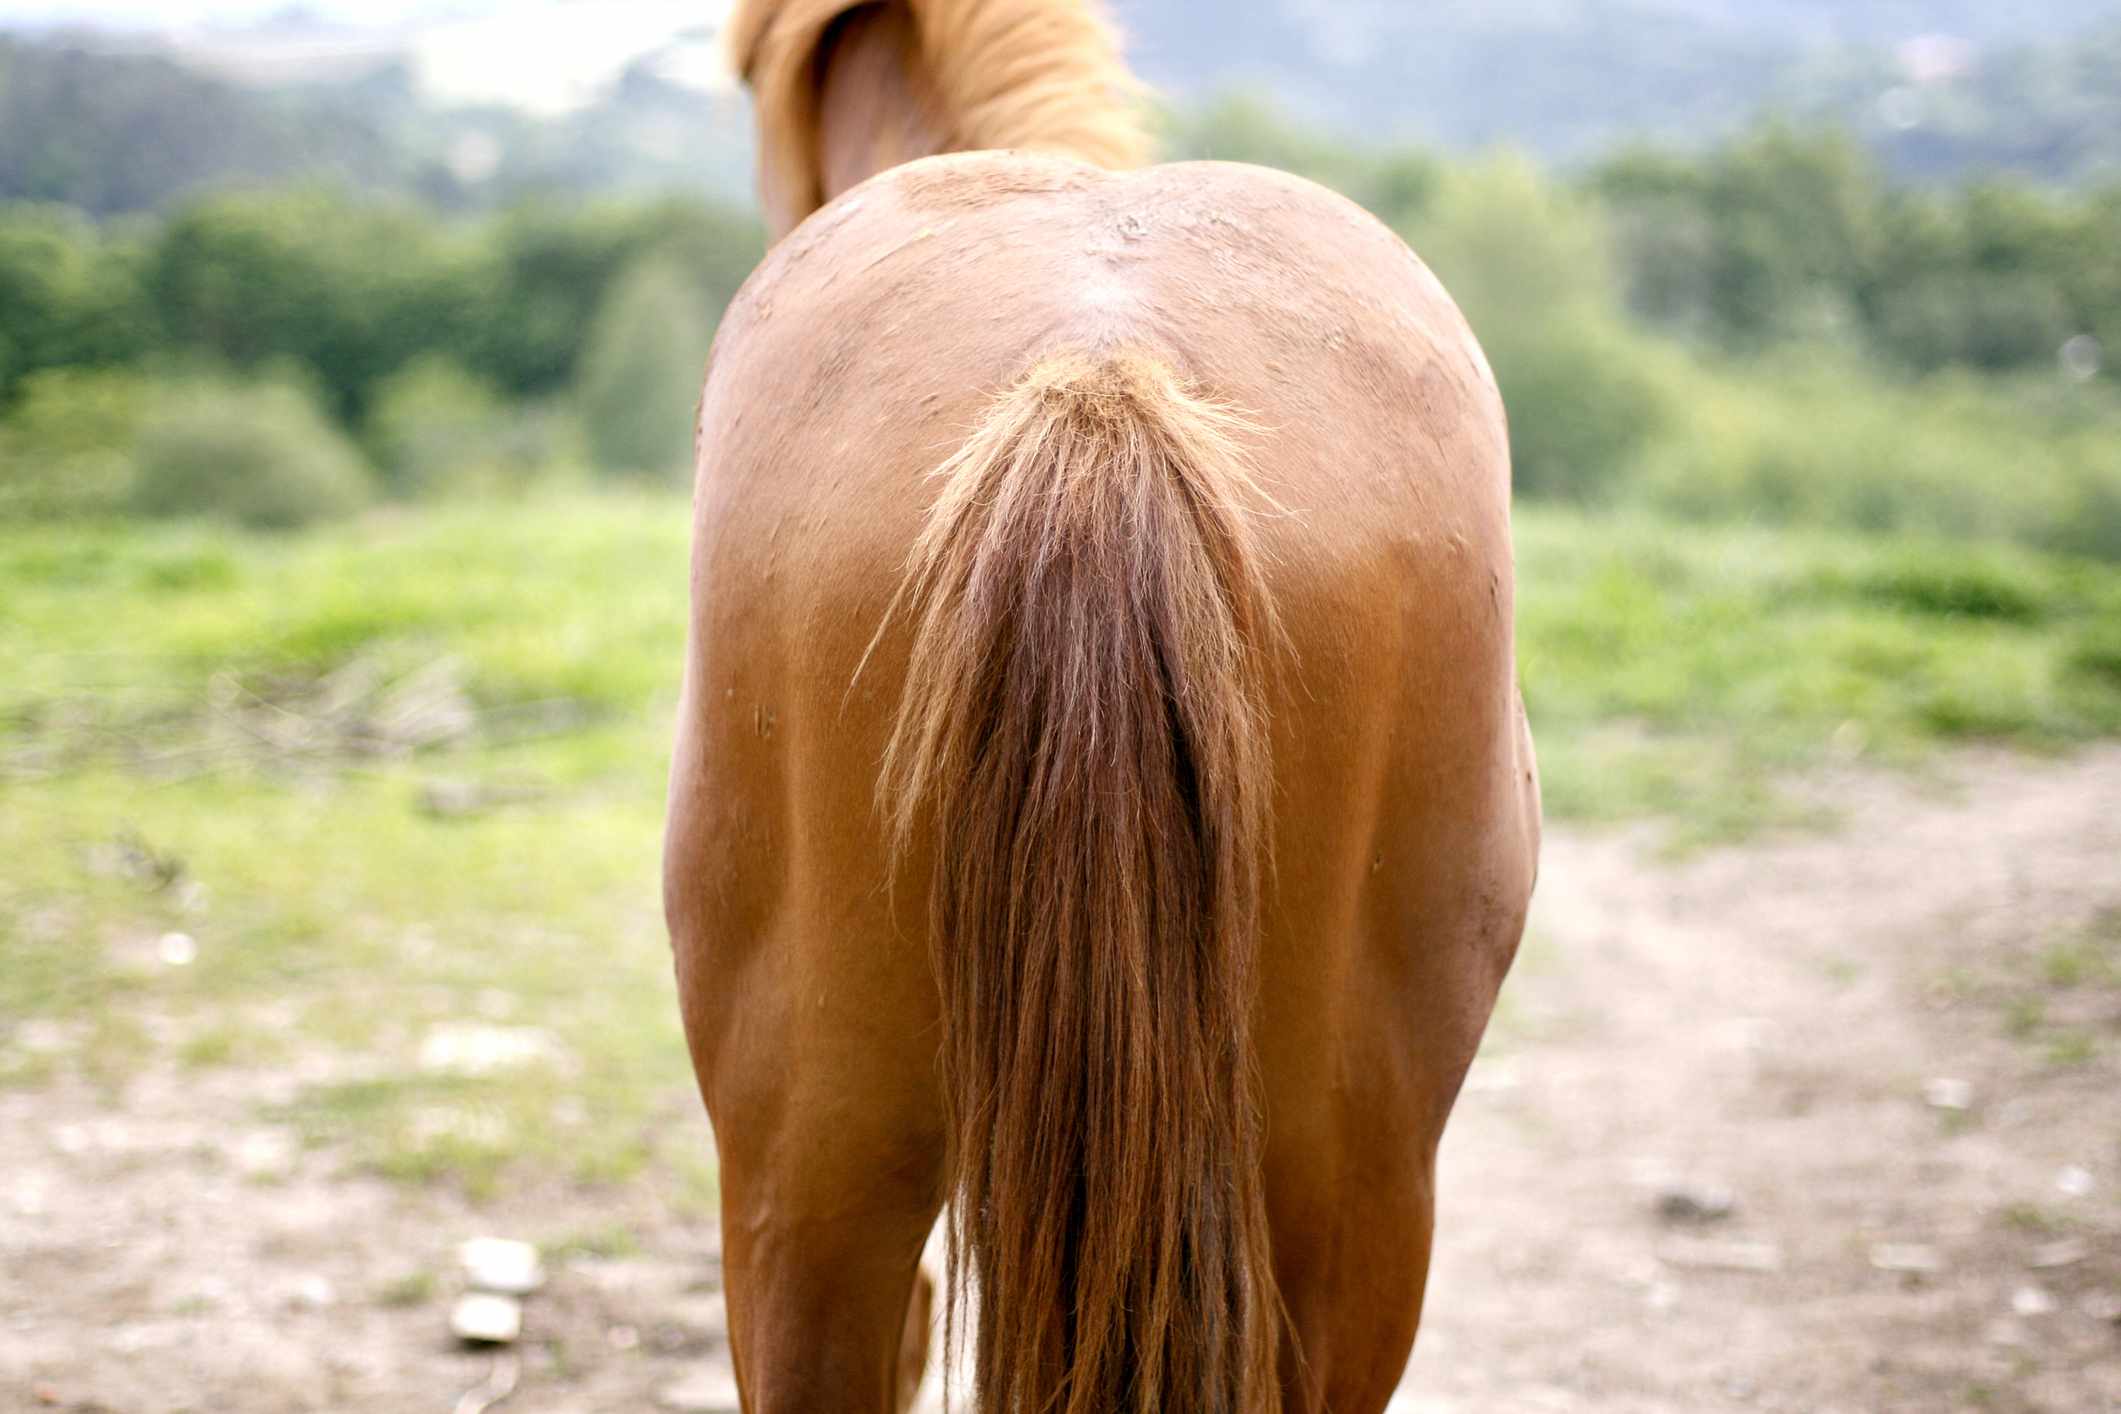 A horse's tail